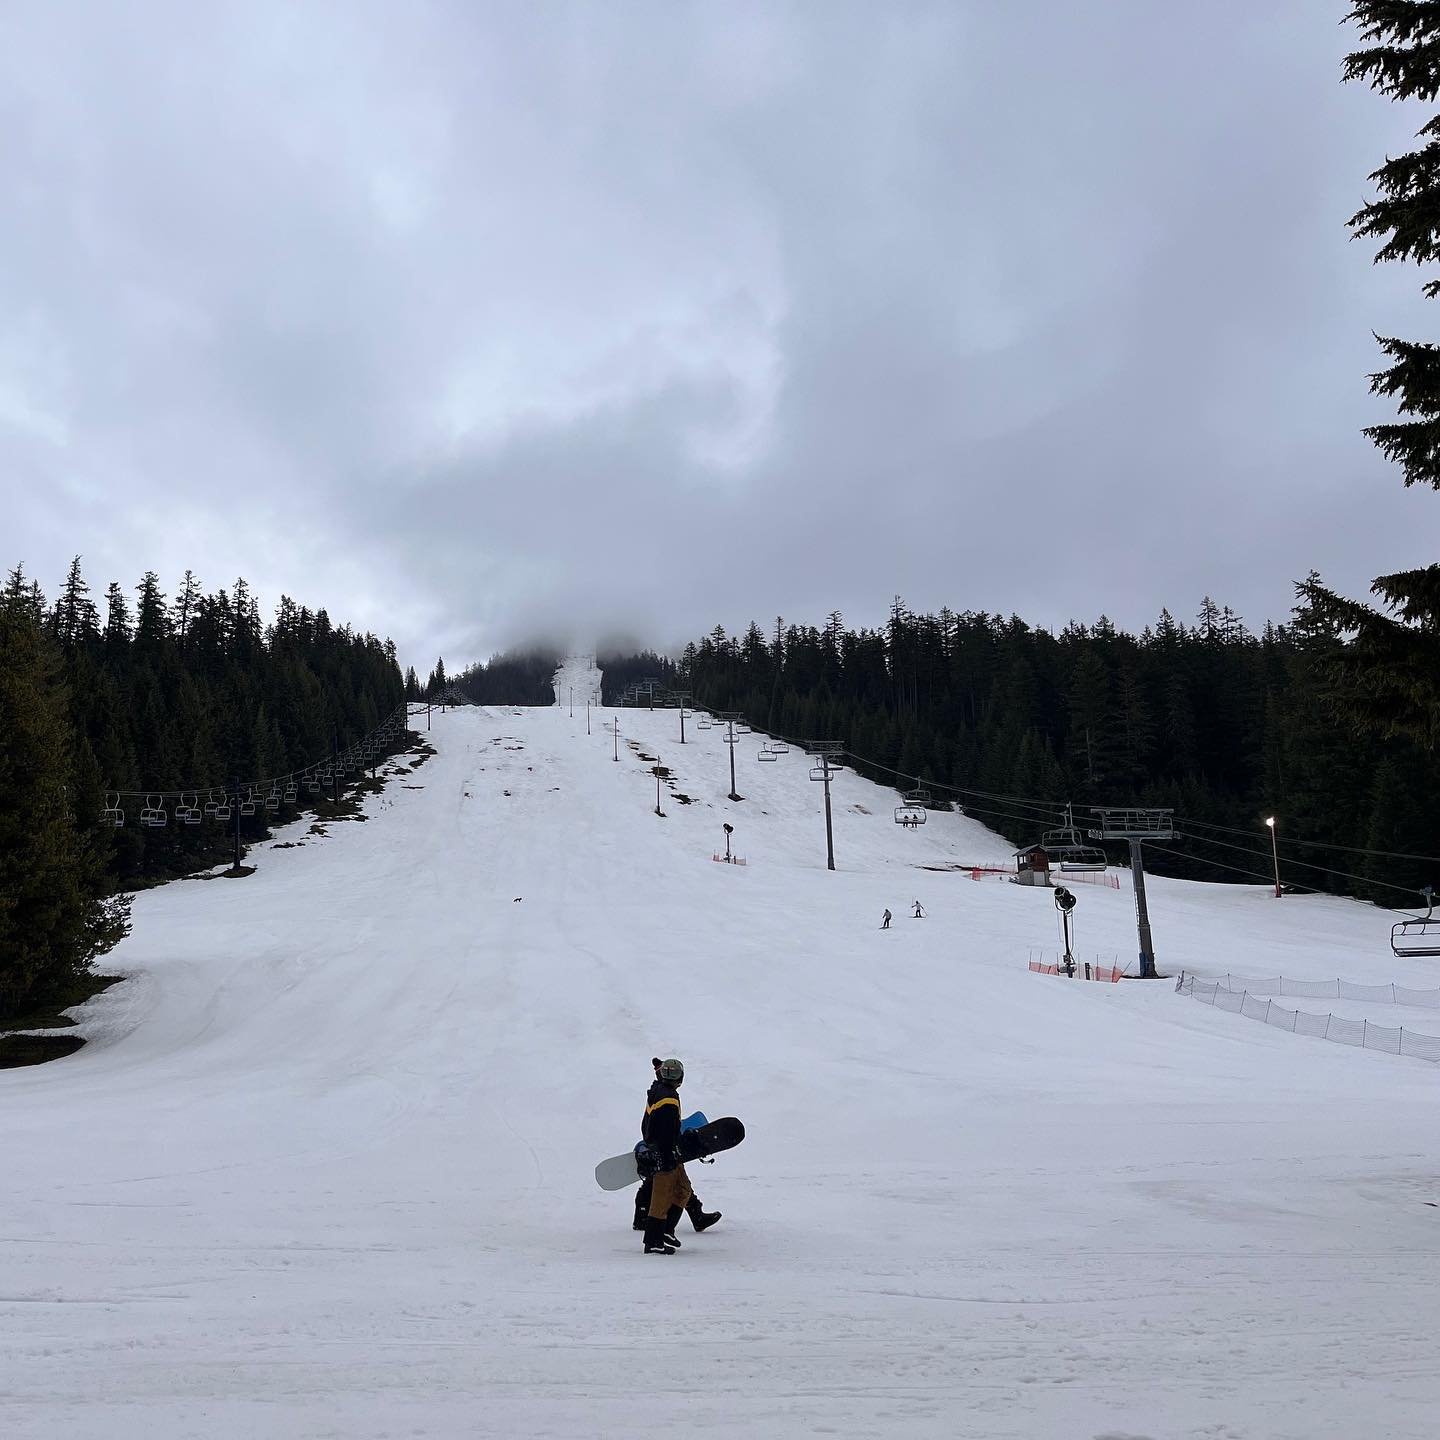 INITIAL IMPRESSIONS @skiwillamette, Oregon:
- Conditions weren&rsquo;t the best, with hard rain and heavy fog, but despite that all trails were open and trees were skiable with few exceptions. Impressive cover for mid April.
- Pretty good diversity o